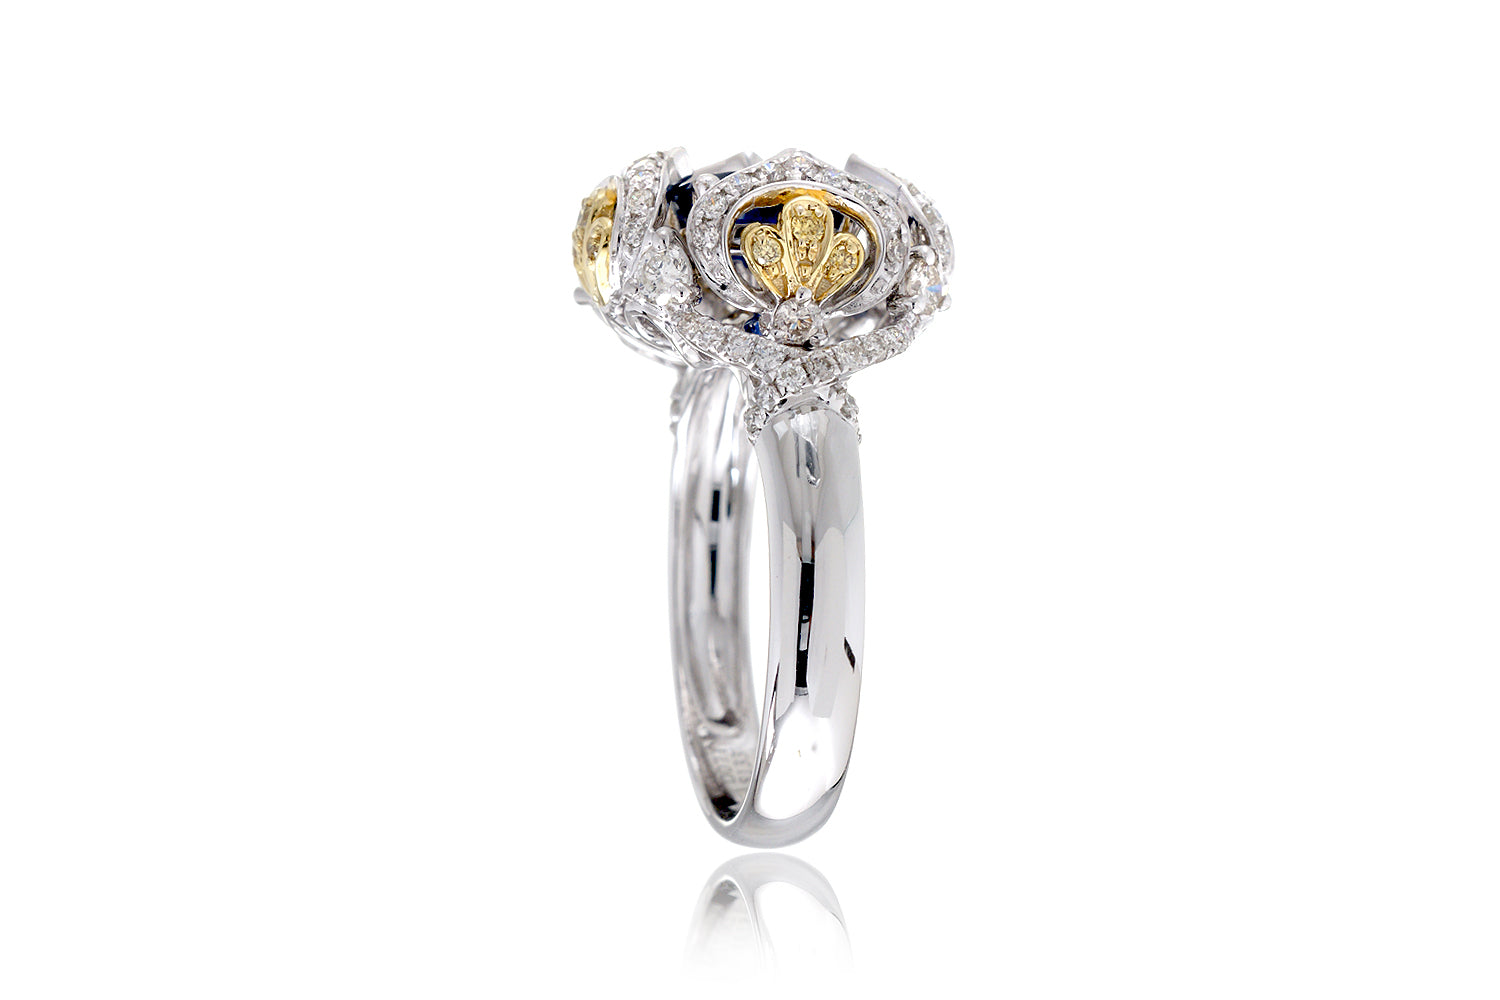 The Beatrice Sapphire Ring